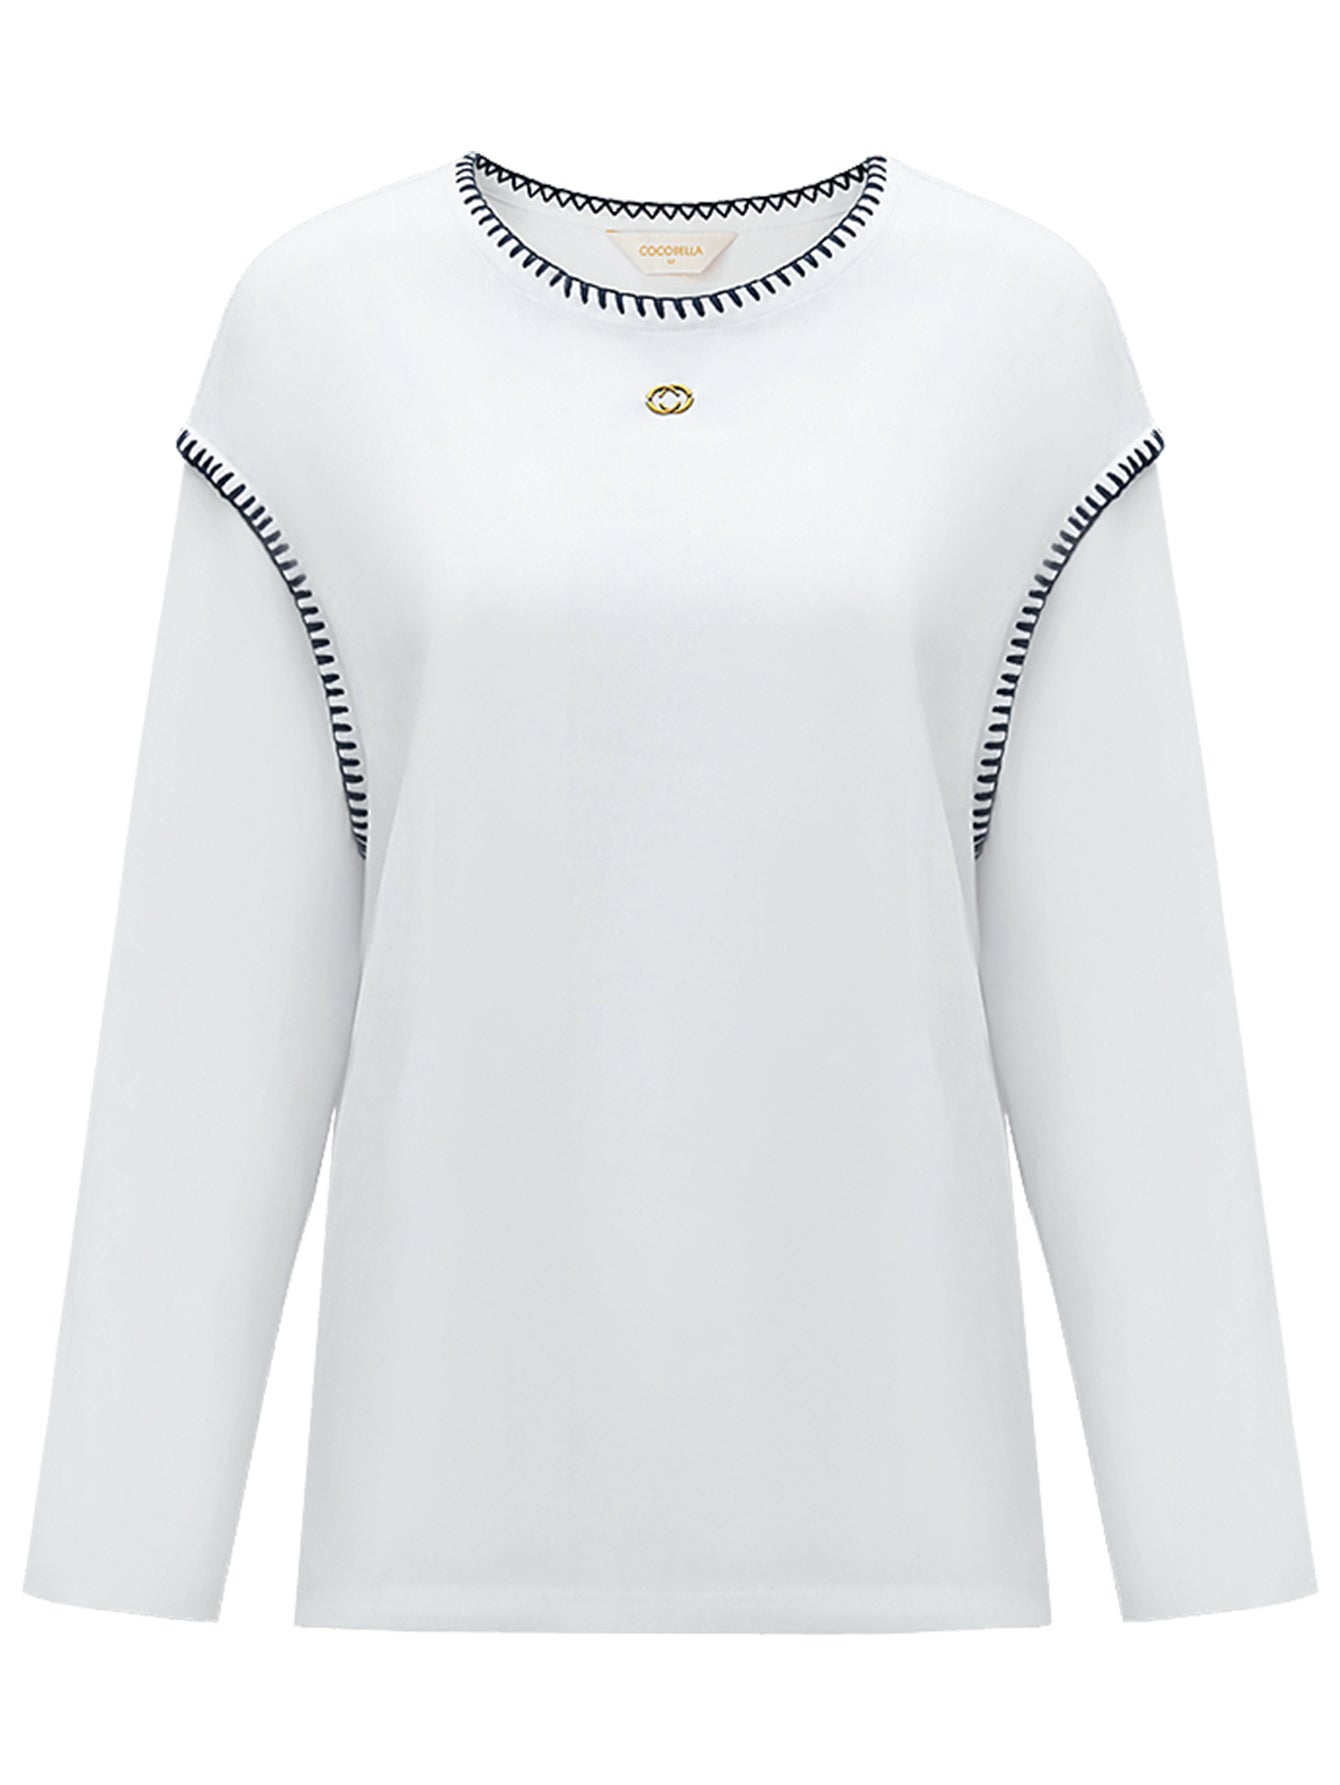 long-sleeve-tee-with-contrast-stitching_all_white_4.jpg